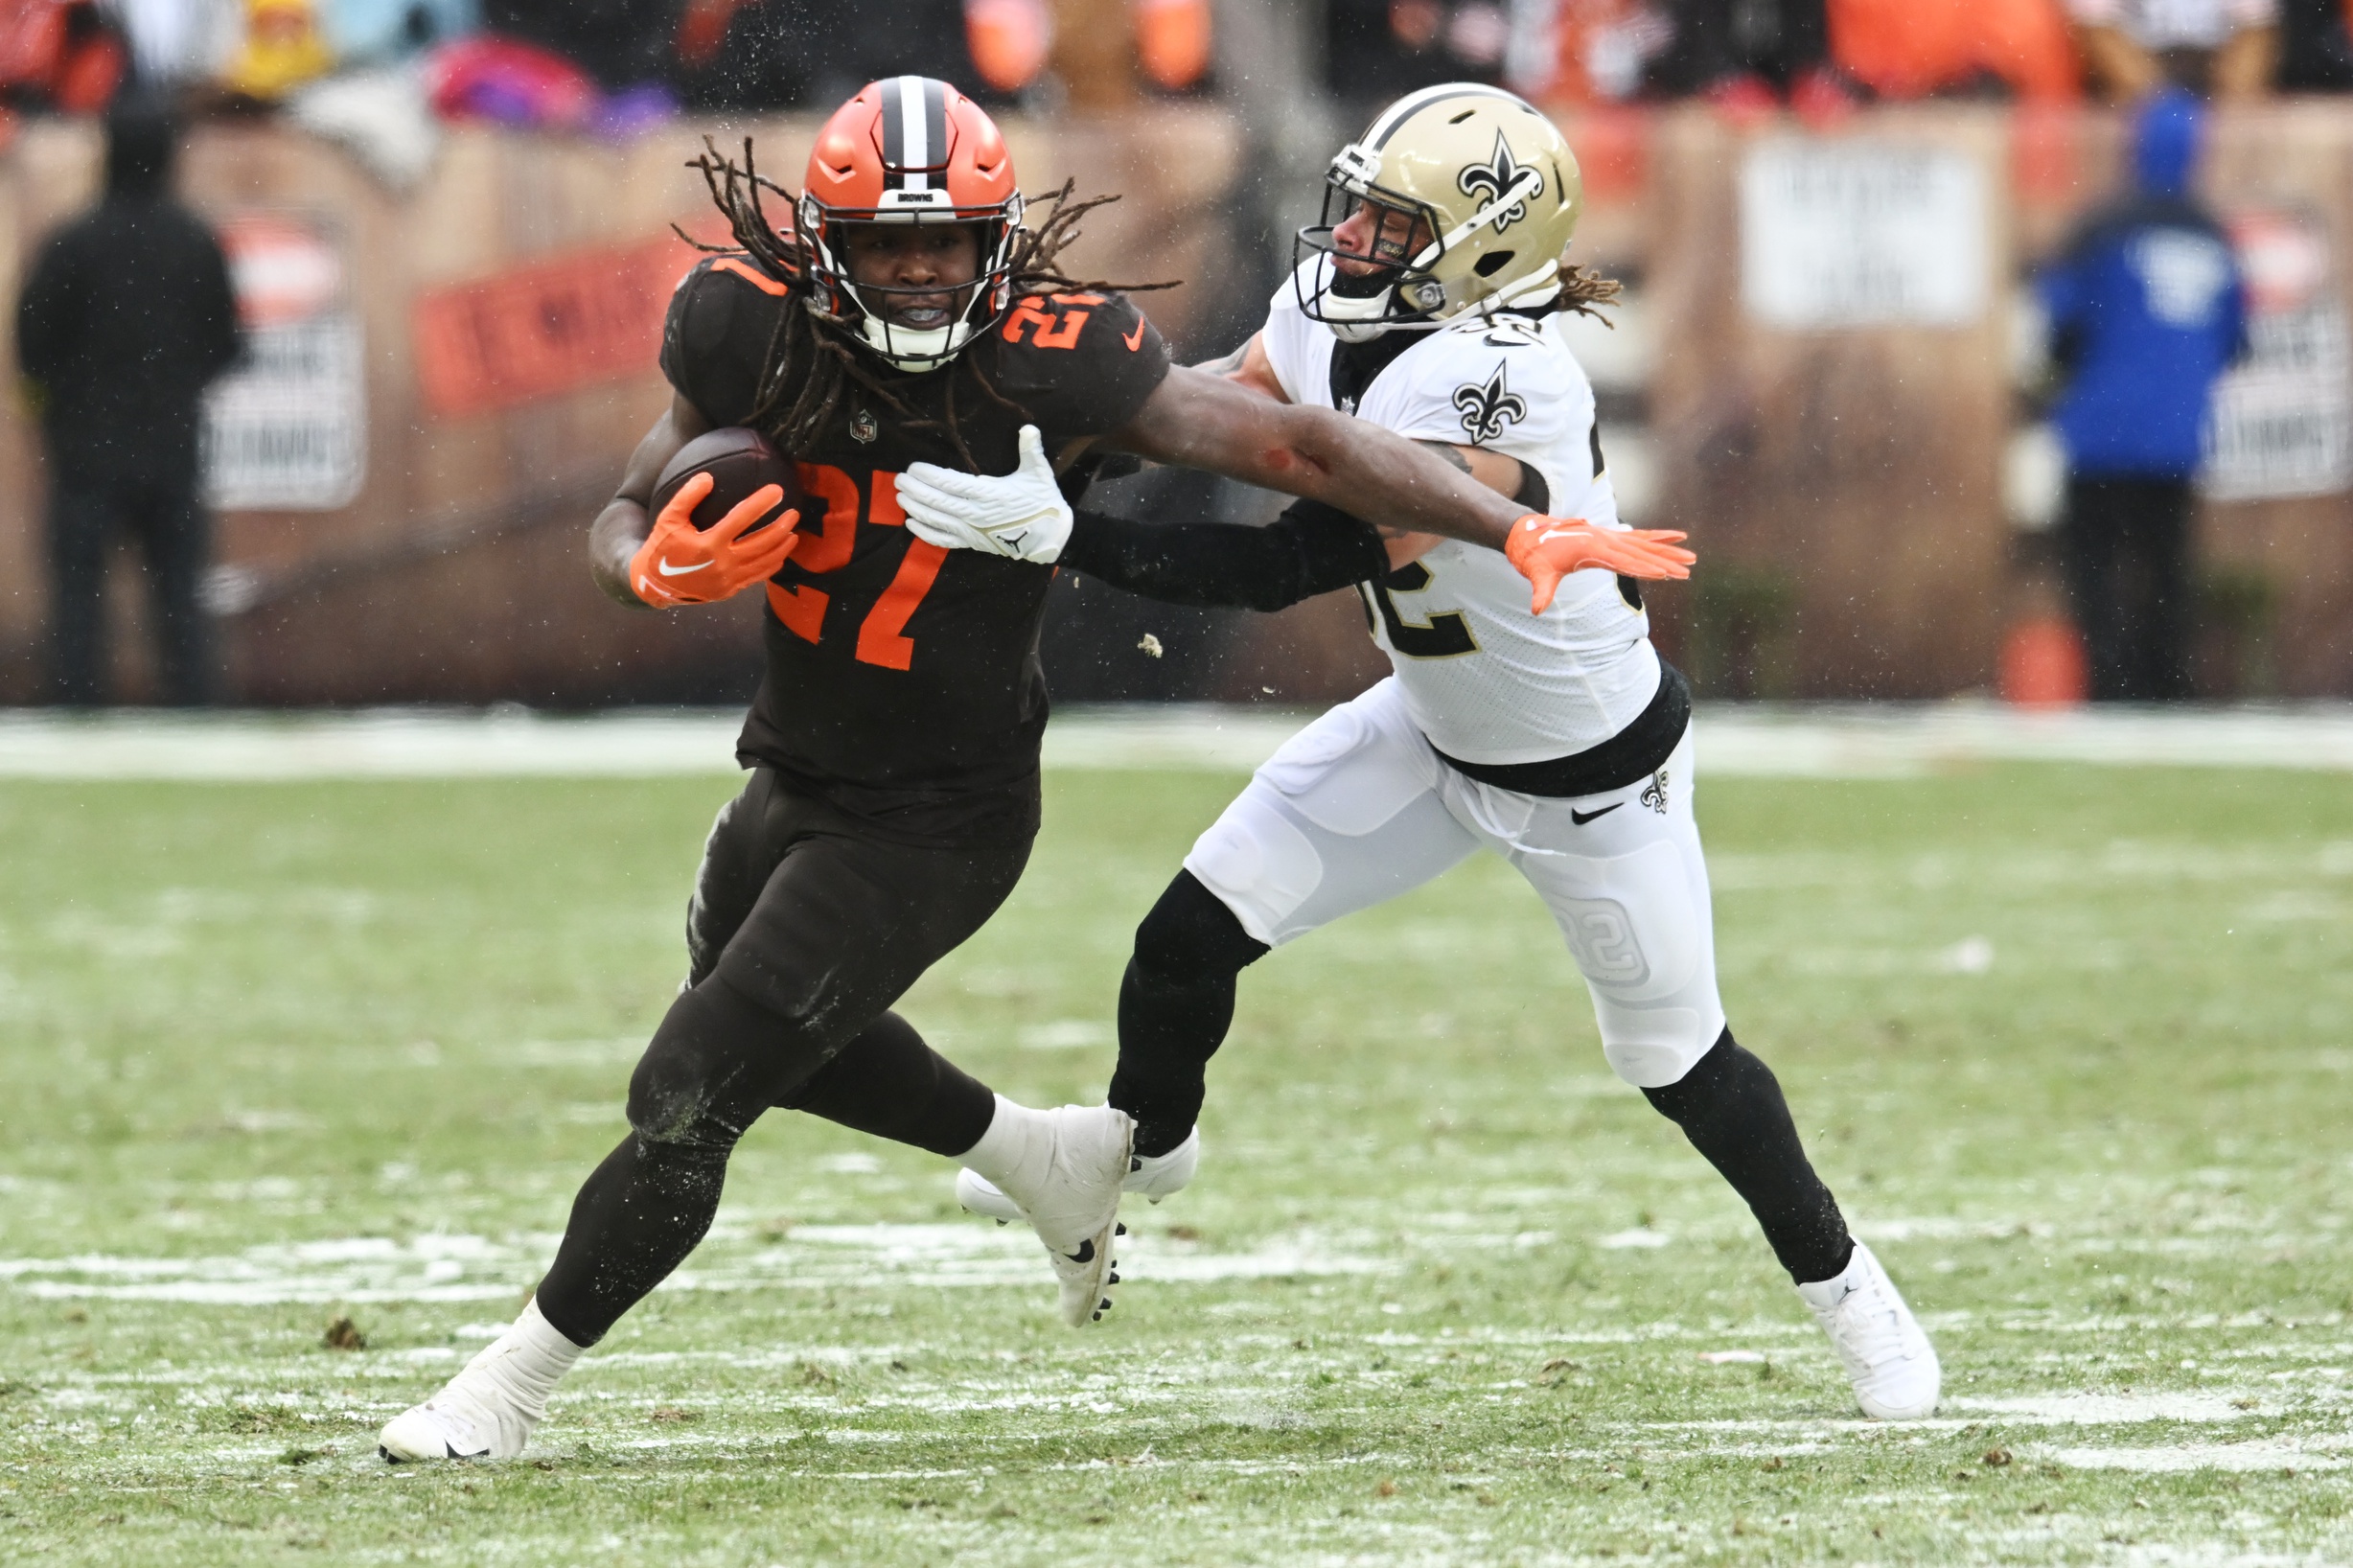 Dec 24, 2022; Cleveland, Ohio, USA; New Orleans Saints safety Tyrann Mathieu (32) tackles Cleveland Browns running back Kareem Hunt (27) during the first half at FirstEnergy Stadium. Mandatory Credit: Ken Blaze-USA TODAY Sports NFC North News